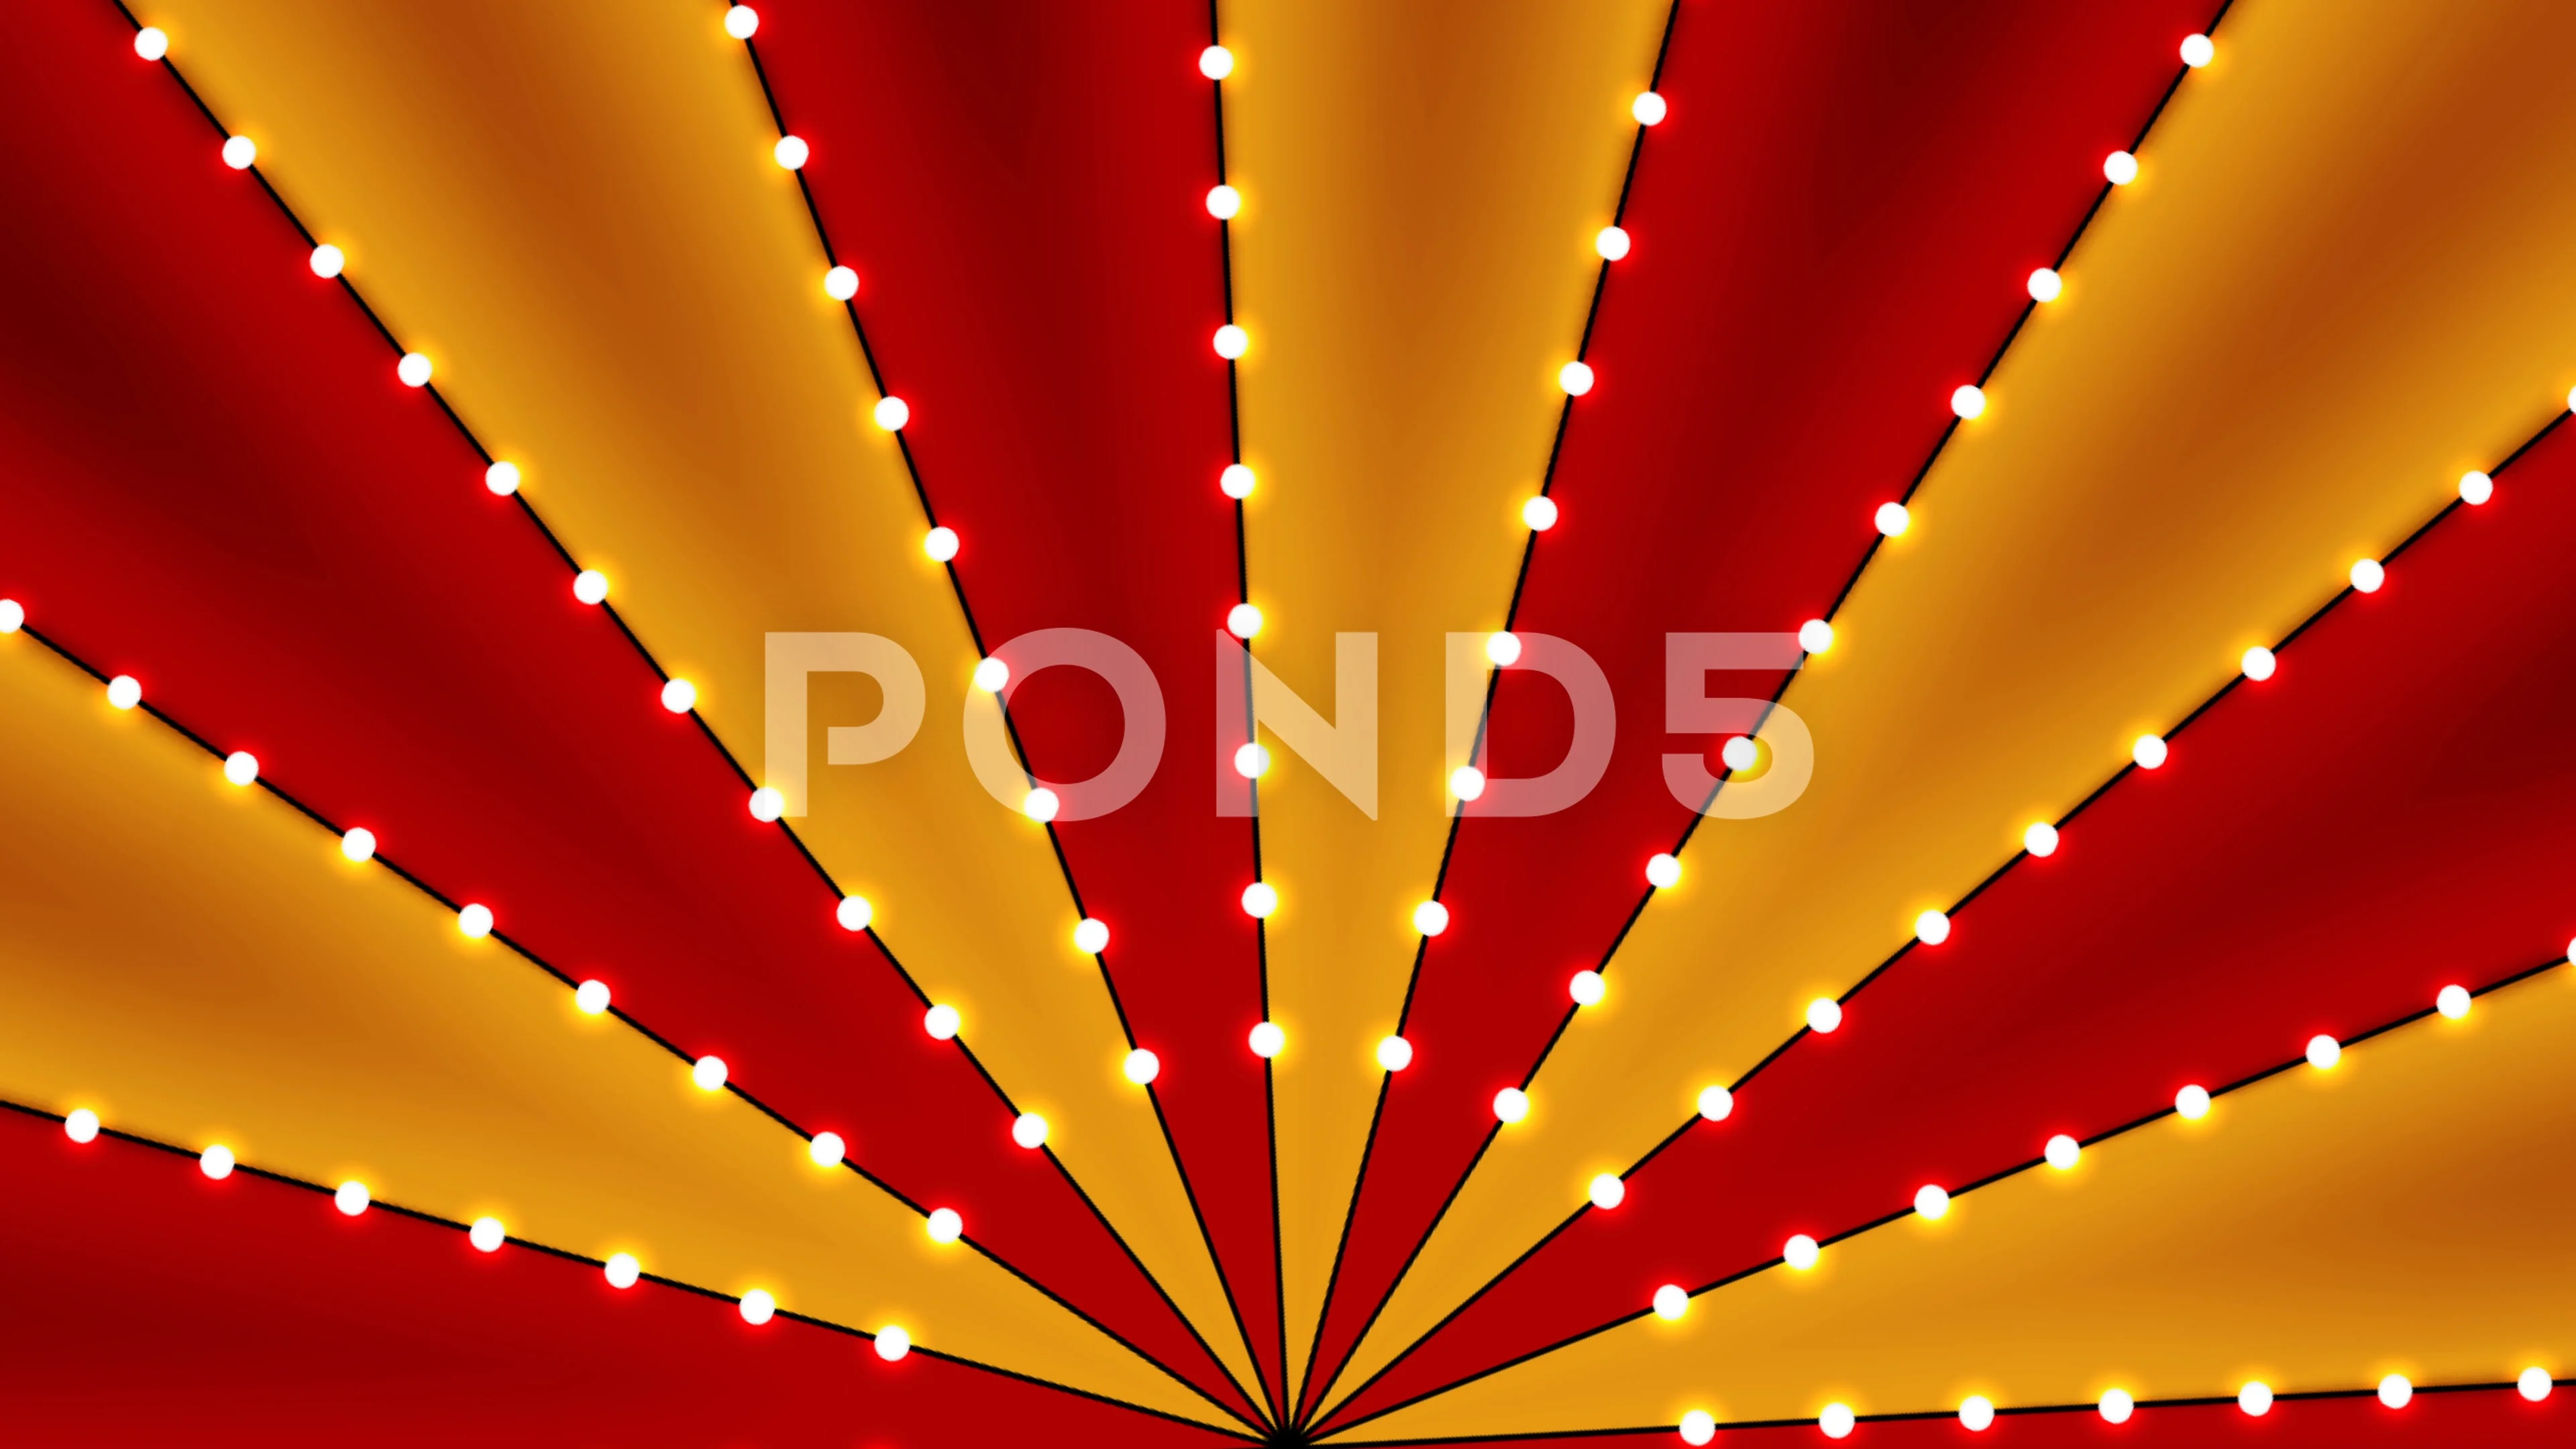 circus stripes background